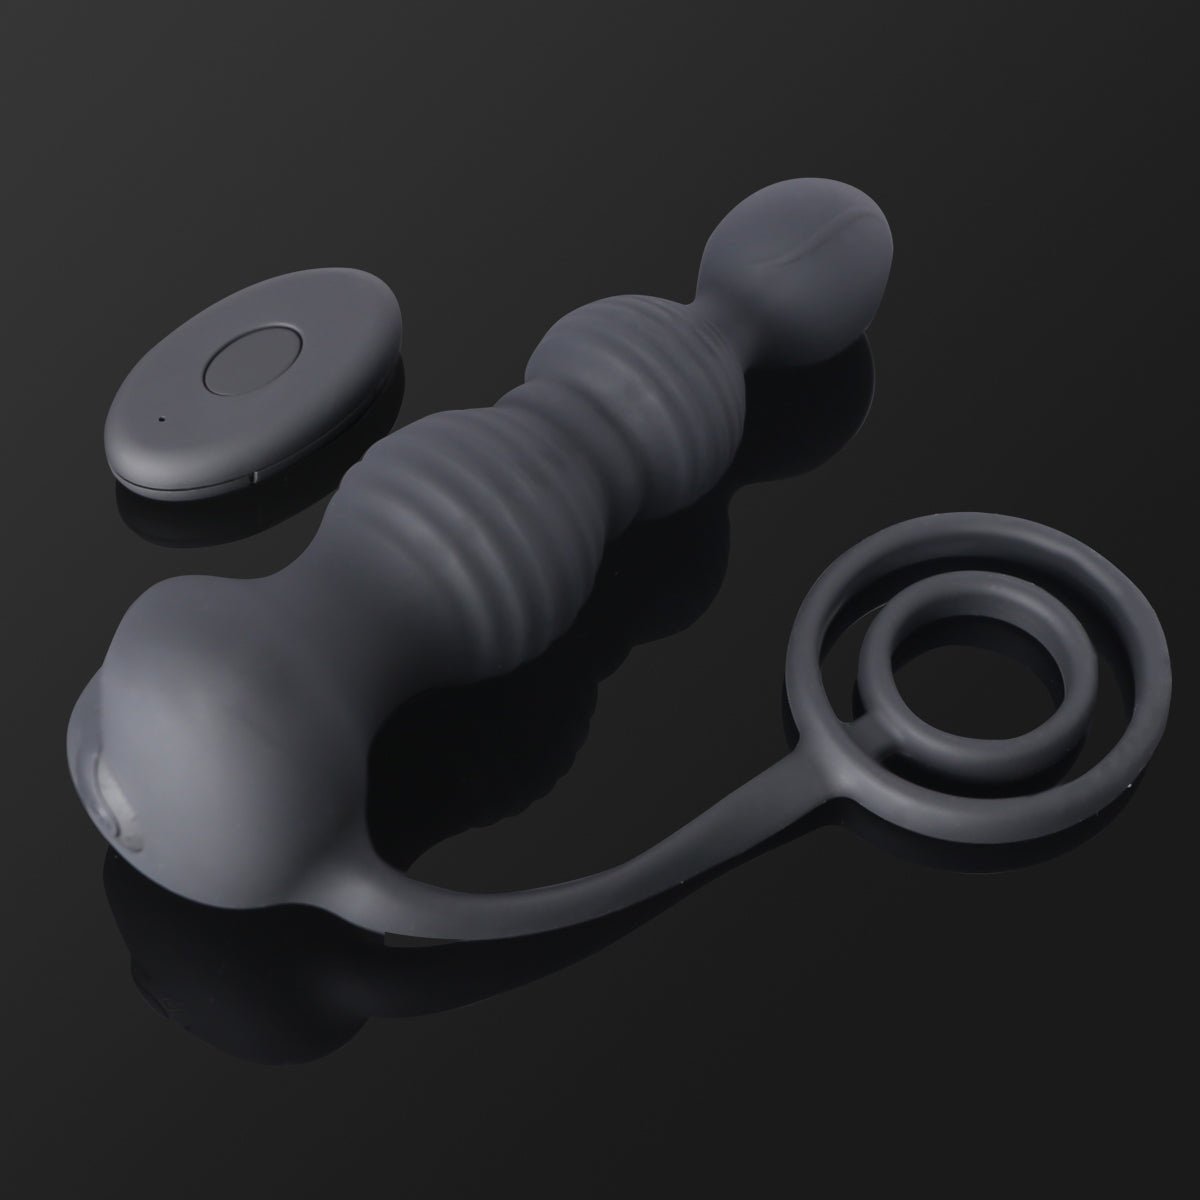 "Man's best friend" - Remote Butt plug + Cock ring - Oxy-shop